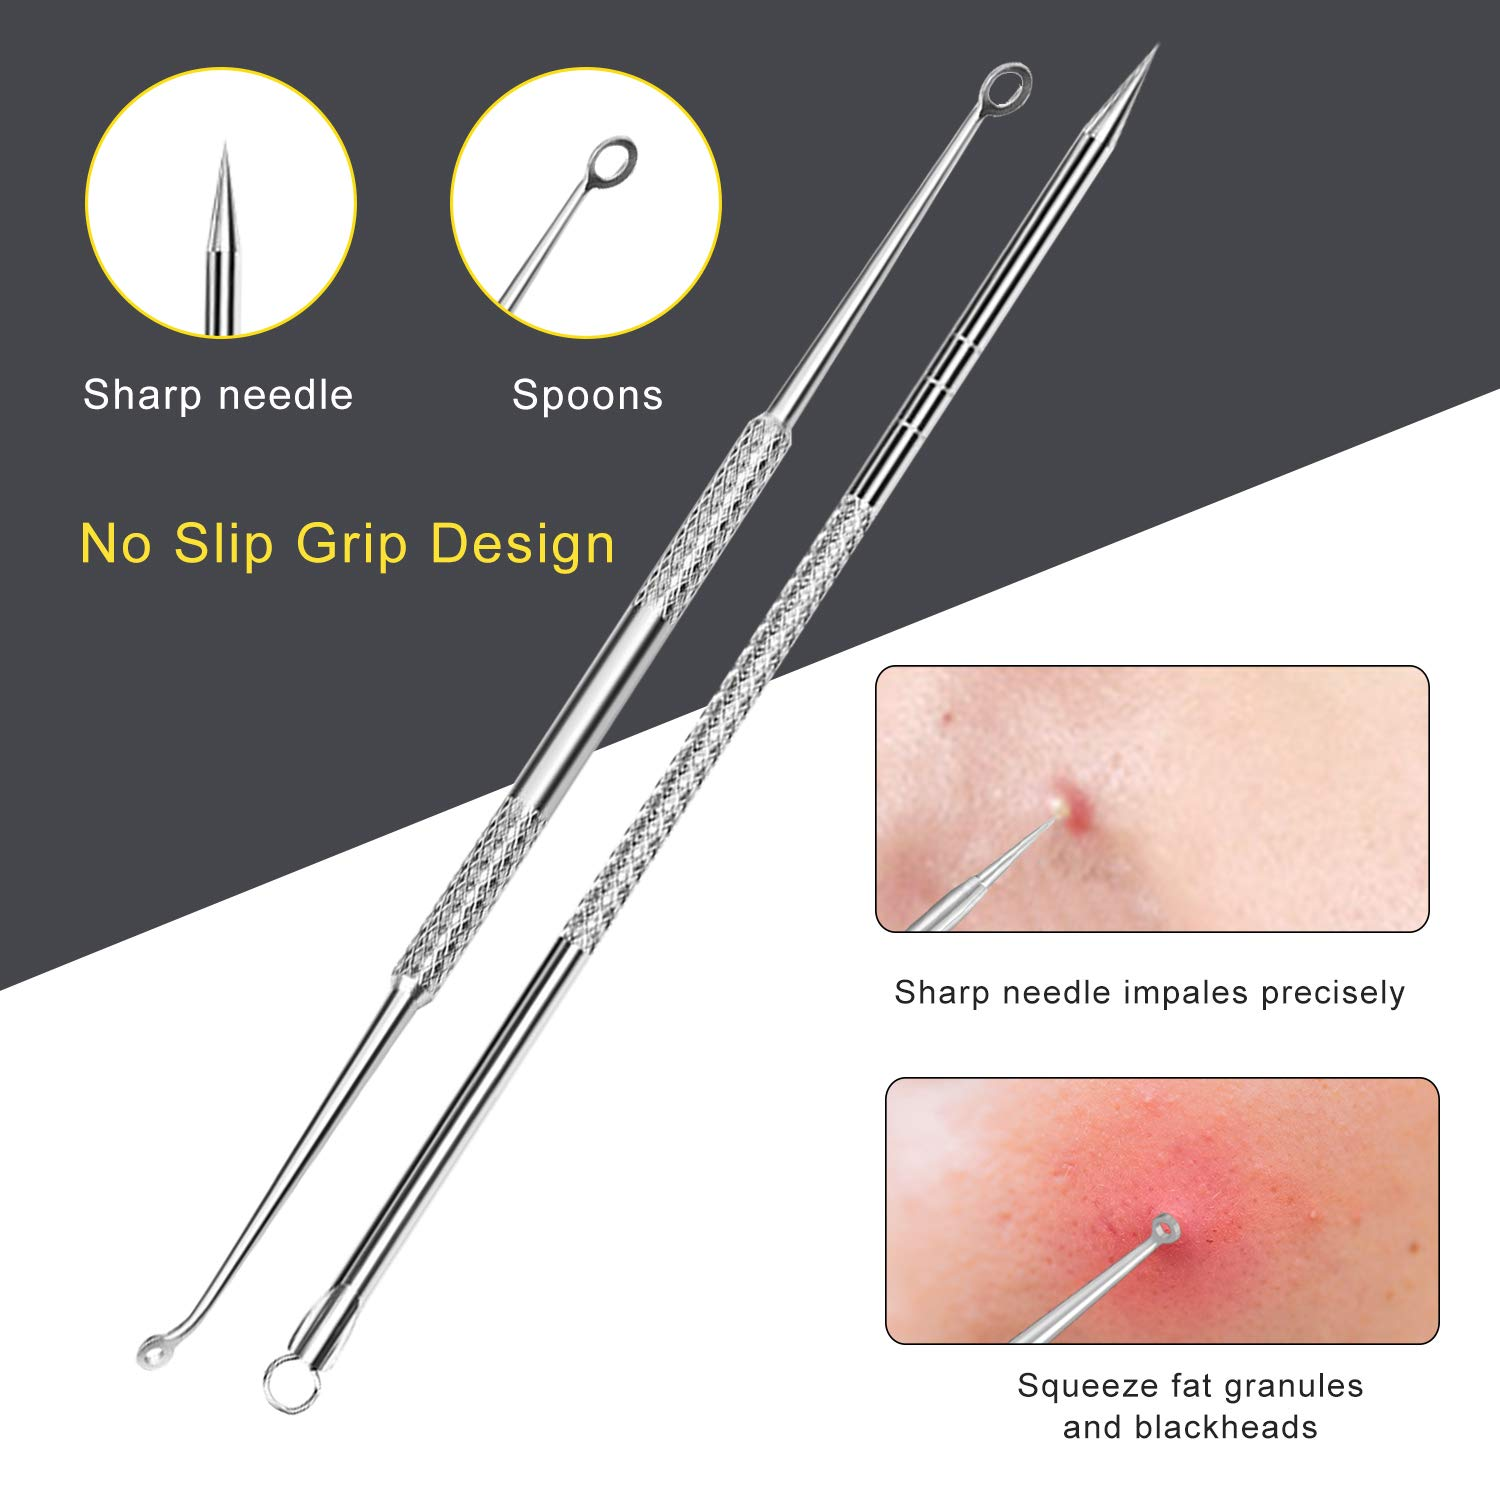 Blackhead Remover Tool, 10 Pcs Professional Pimple Comedone Extractor Popper Tool Acne Removal Kit - Treatment for Pimples, Blackheads, Zit Removing, Forehead,Facial and Nose(Silver) - image 6 of 8